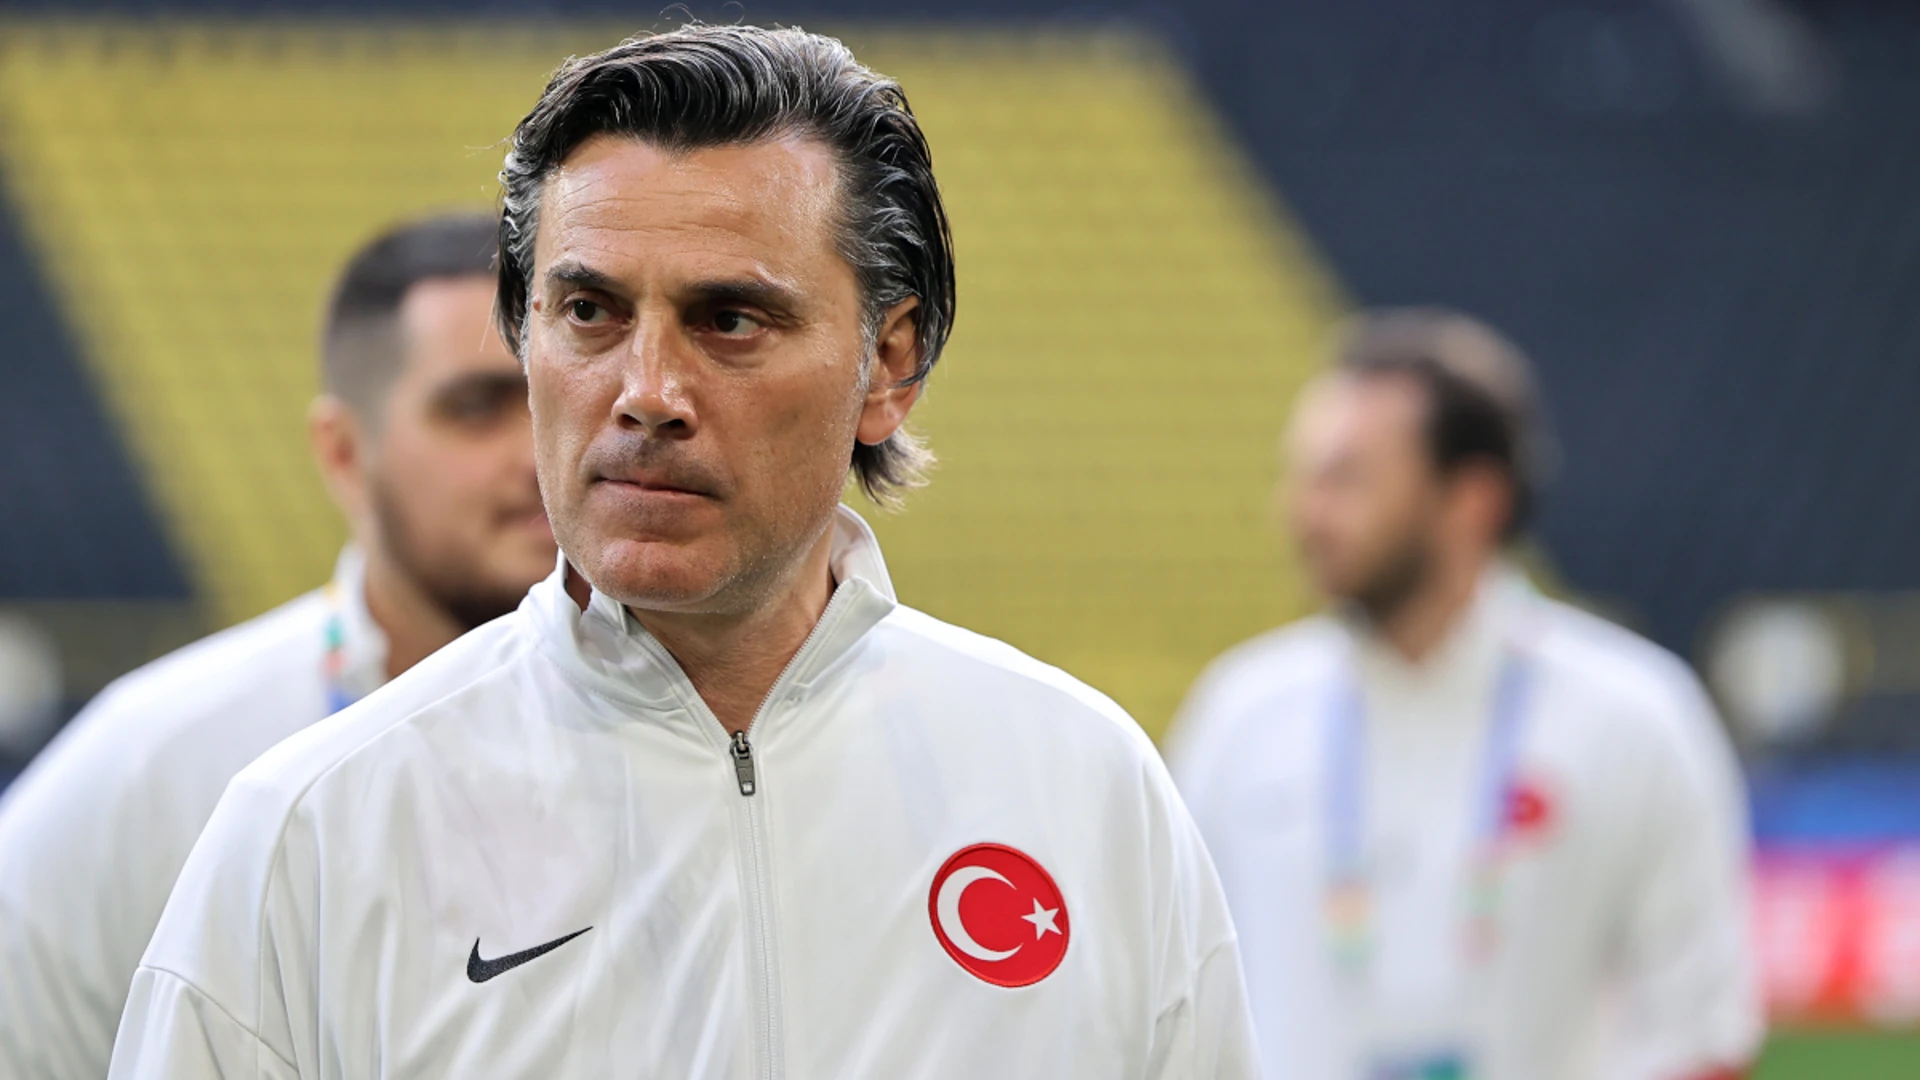 Show your love for Turkey by supporting us, Montella tells critics